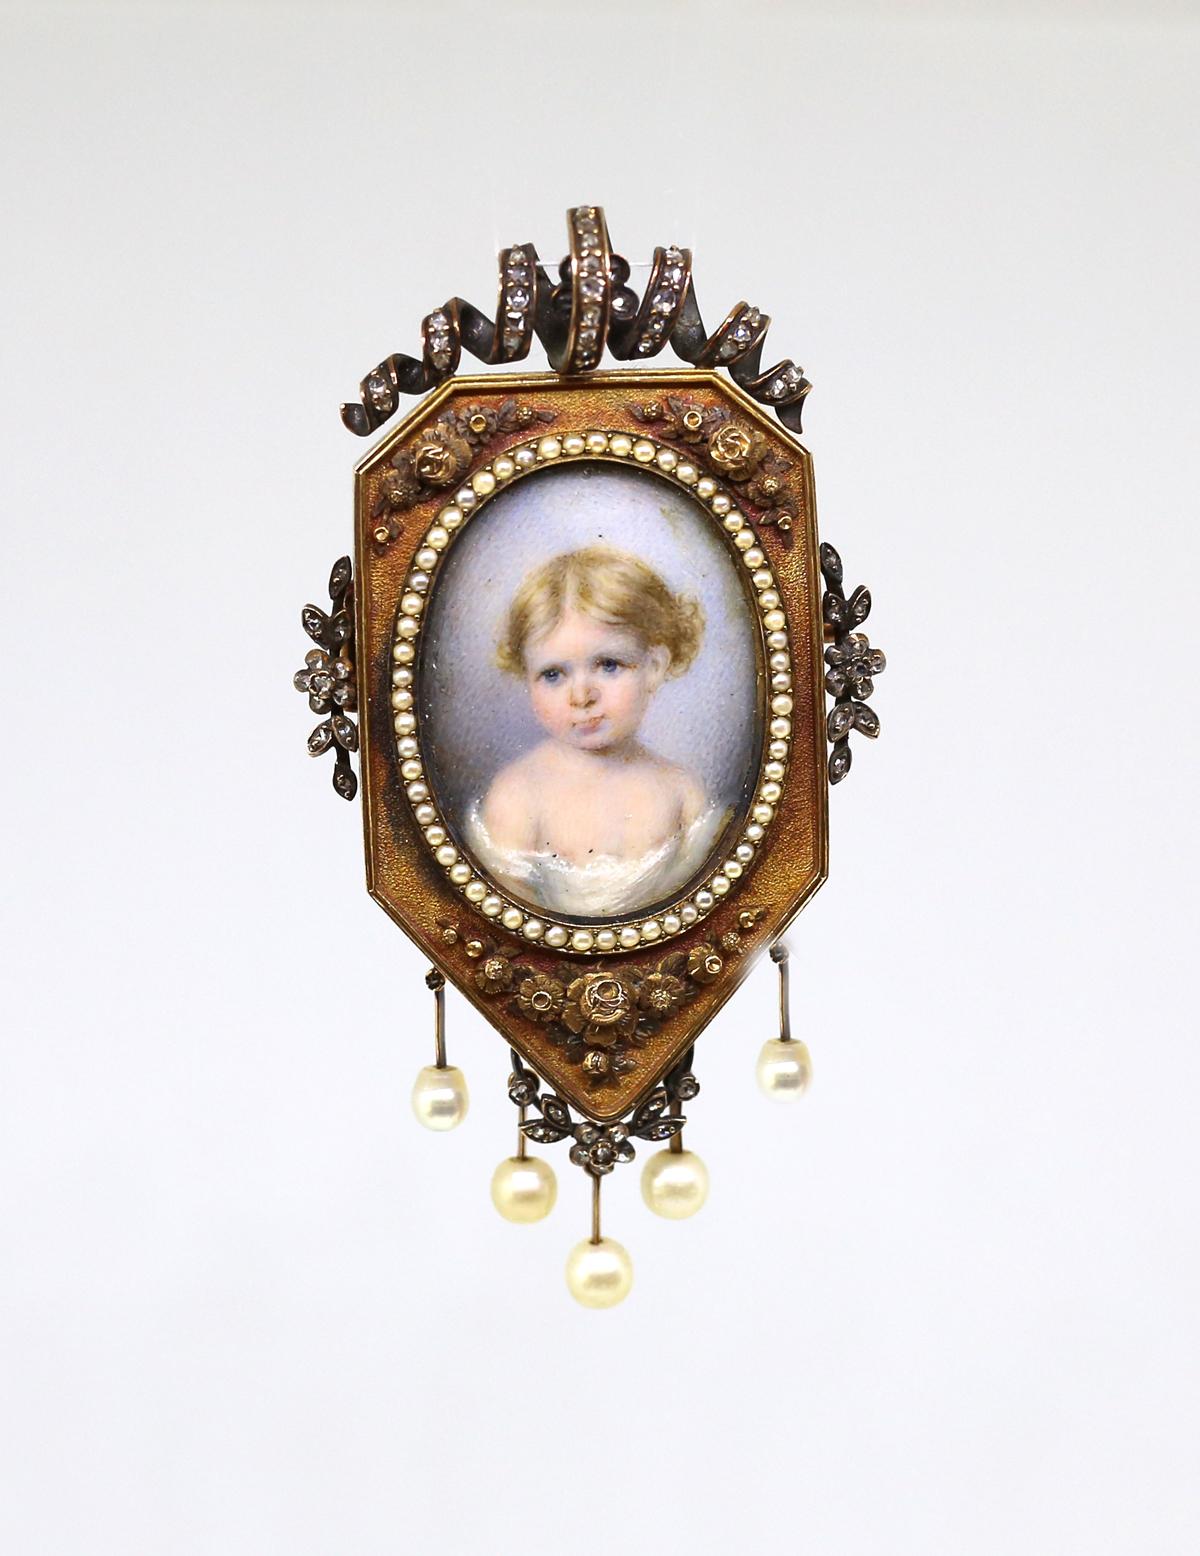 Fine antique Victorian Gold brooch with a miniature painting of a young girl. Outstanding quality item. Circa 1872, England. Top of the geometrically shaped brooch is decorated with a delicate ribbon incorporating tiny old cut diamonds. A row of